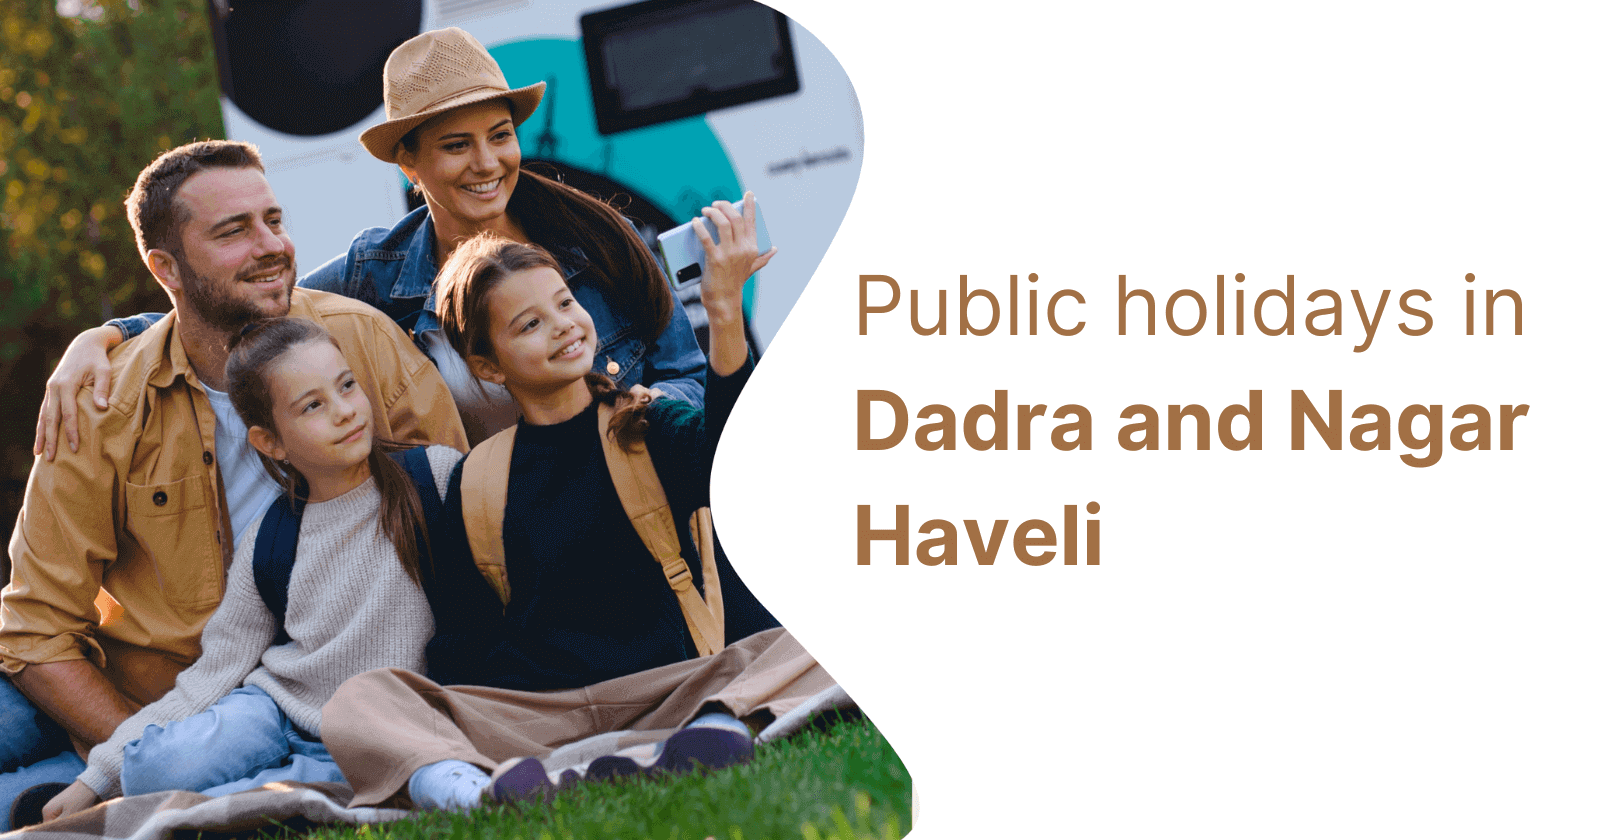 List of Public Holidays in Dadra and Nagar Haveli in 2023